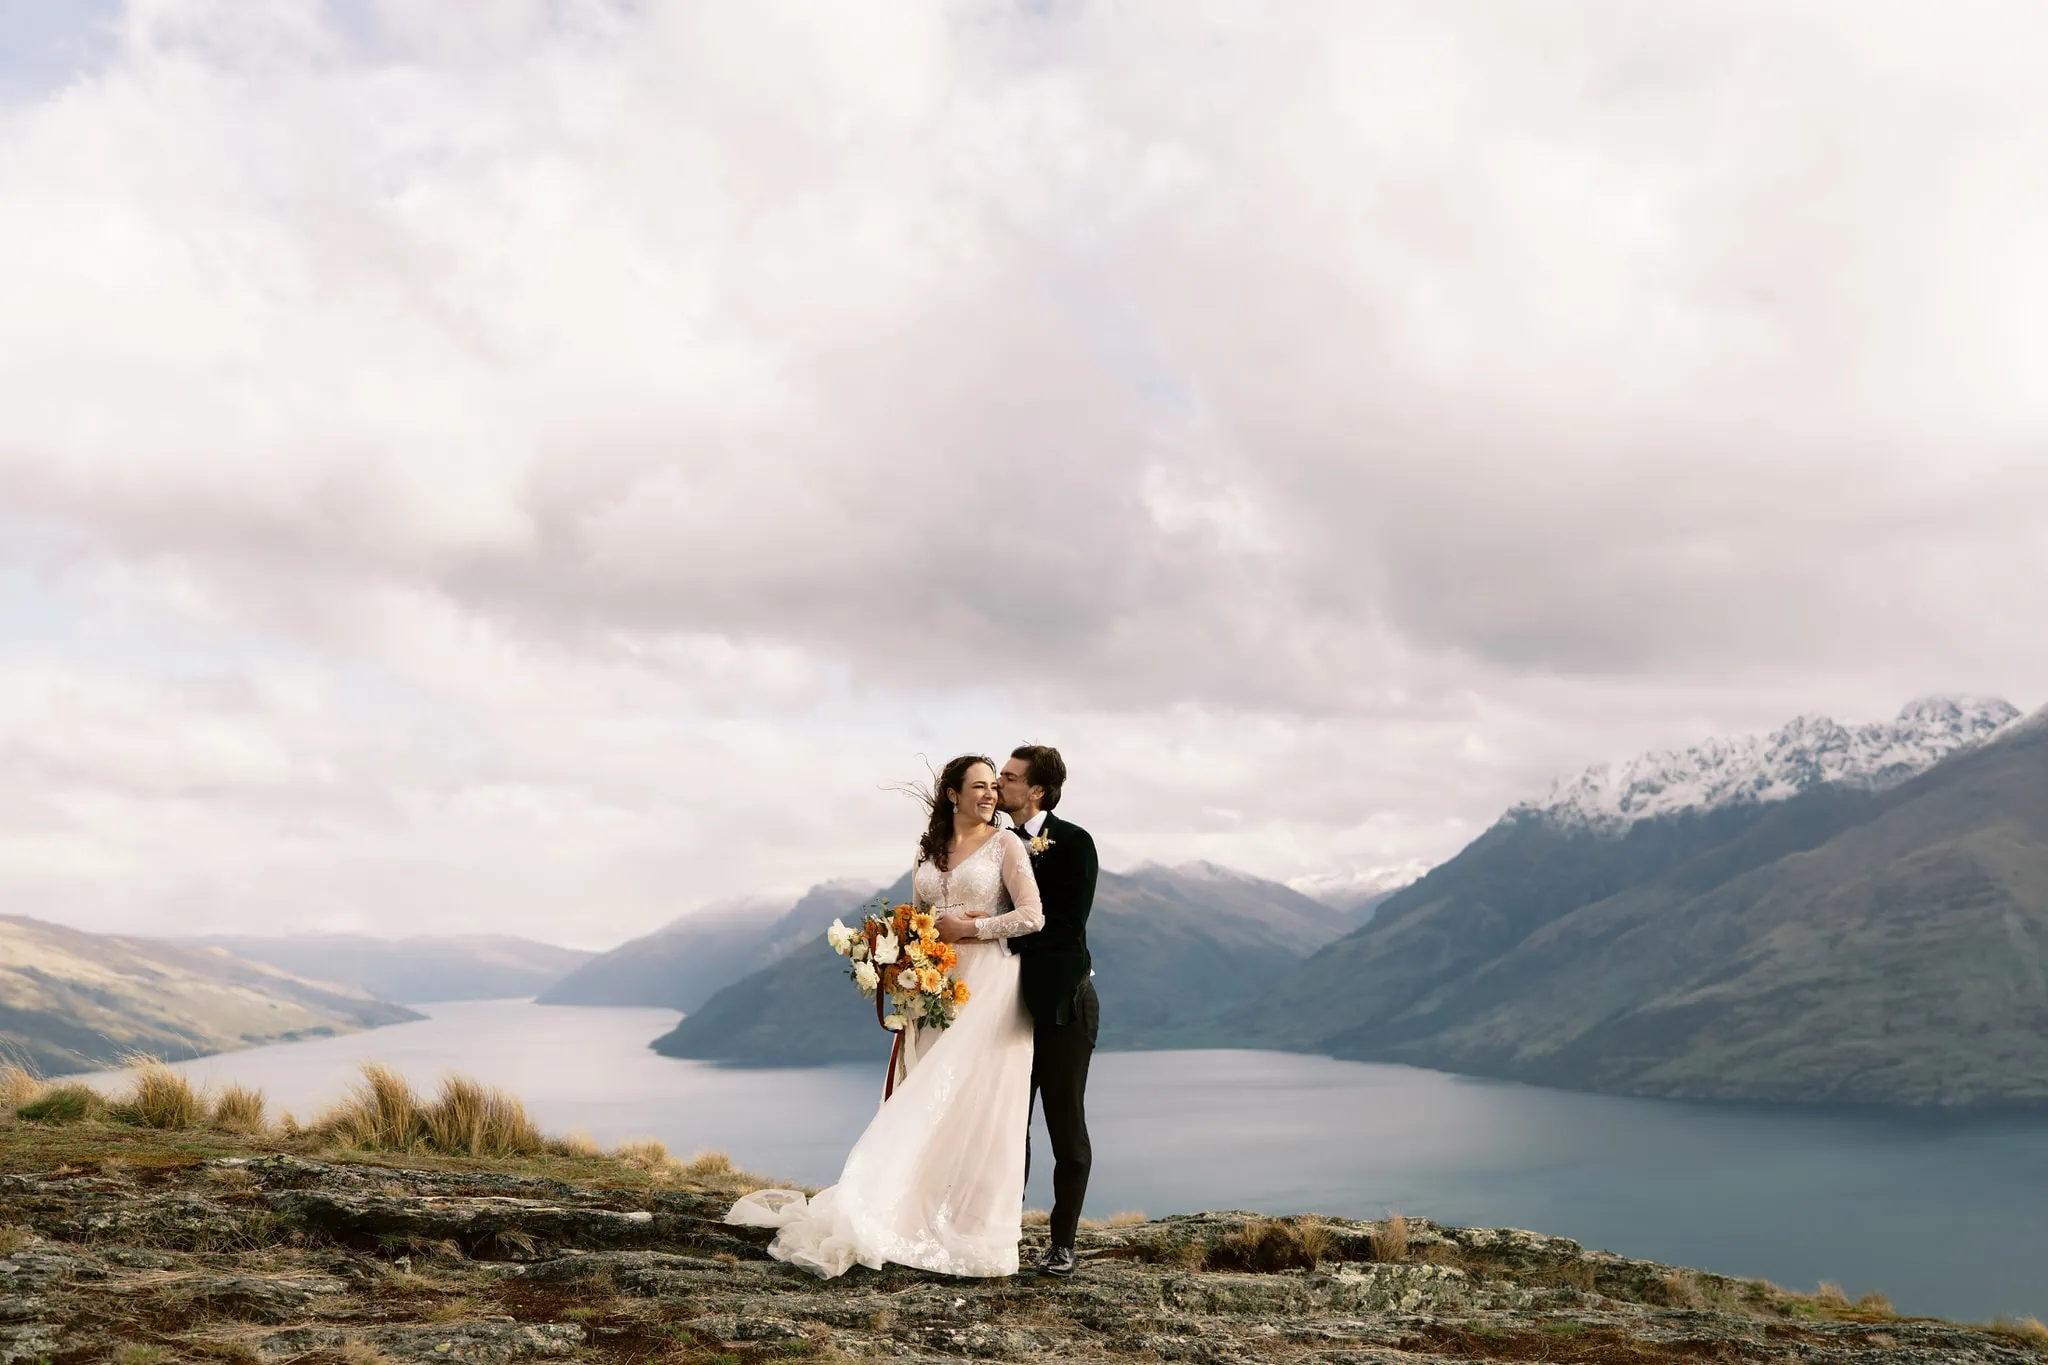 Queenstown New Zealand Elopement Wedding Photographer - photograph of a bride and groom standing on top of a mountain overlooking Lake Wakatipu, at Deer Park Heights